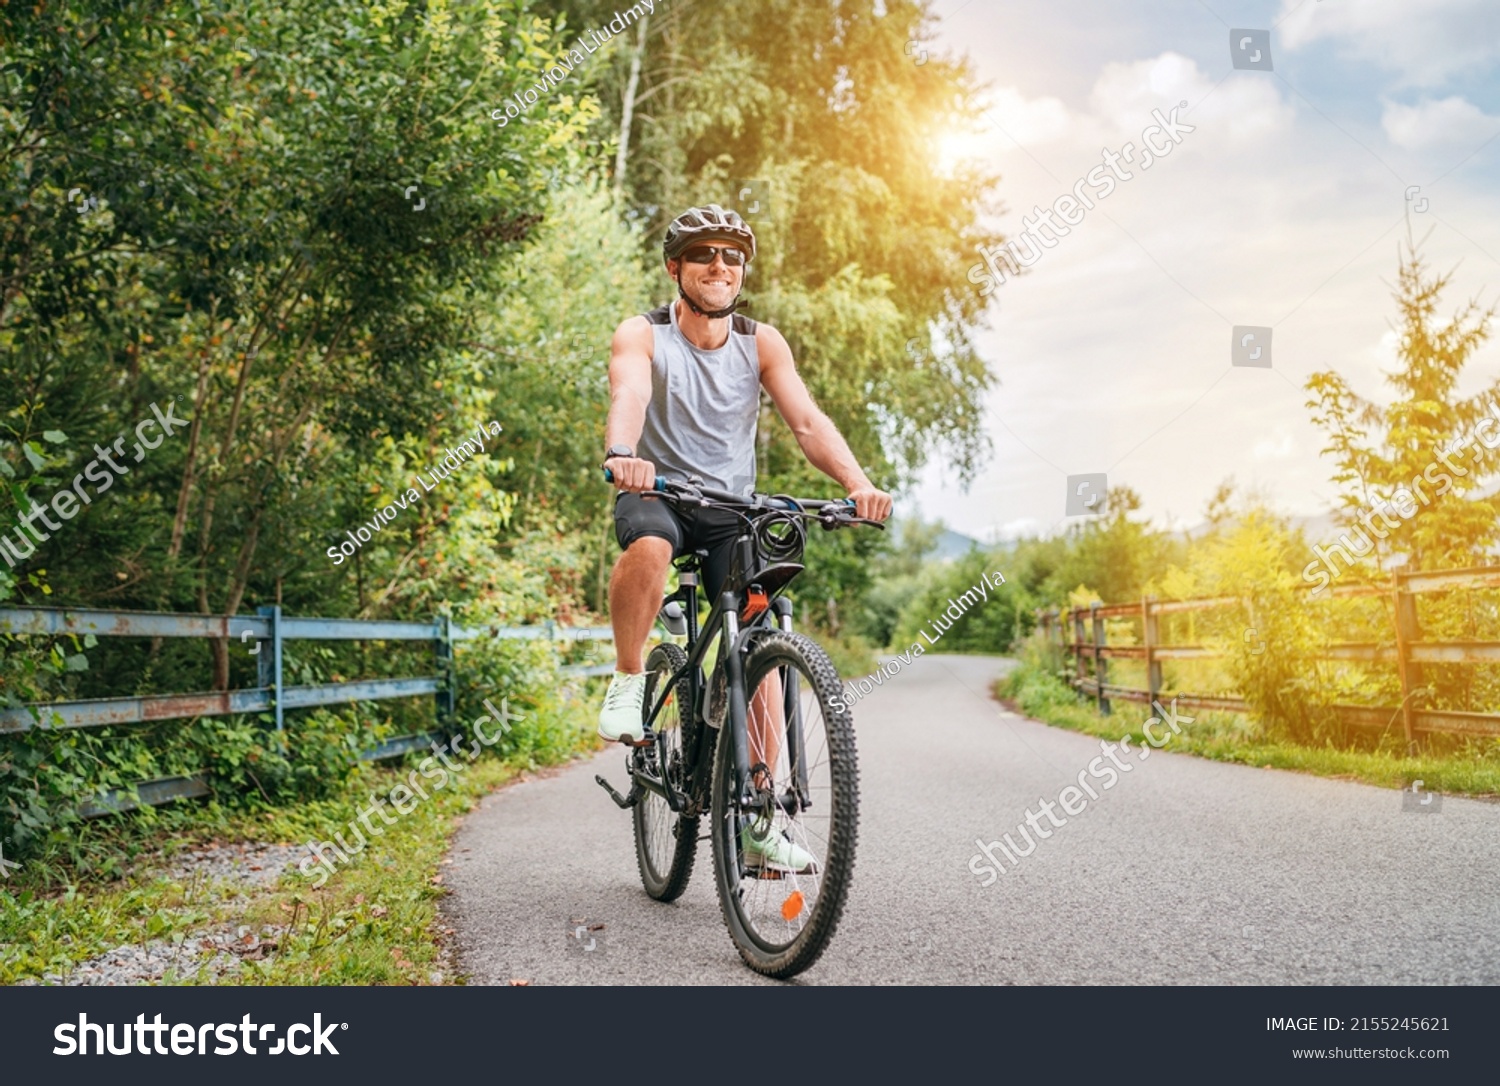 Portrait of a happy smiling man dressed in cycling clothes, helmet and sunglasses riding a bicycle on the asphalt out-of-town bicycle path. Active sporty people concept image. #2155245621